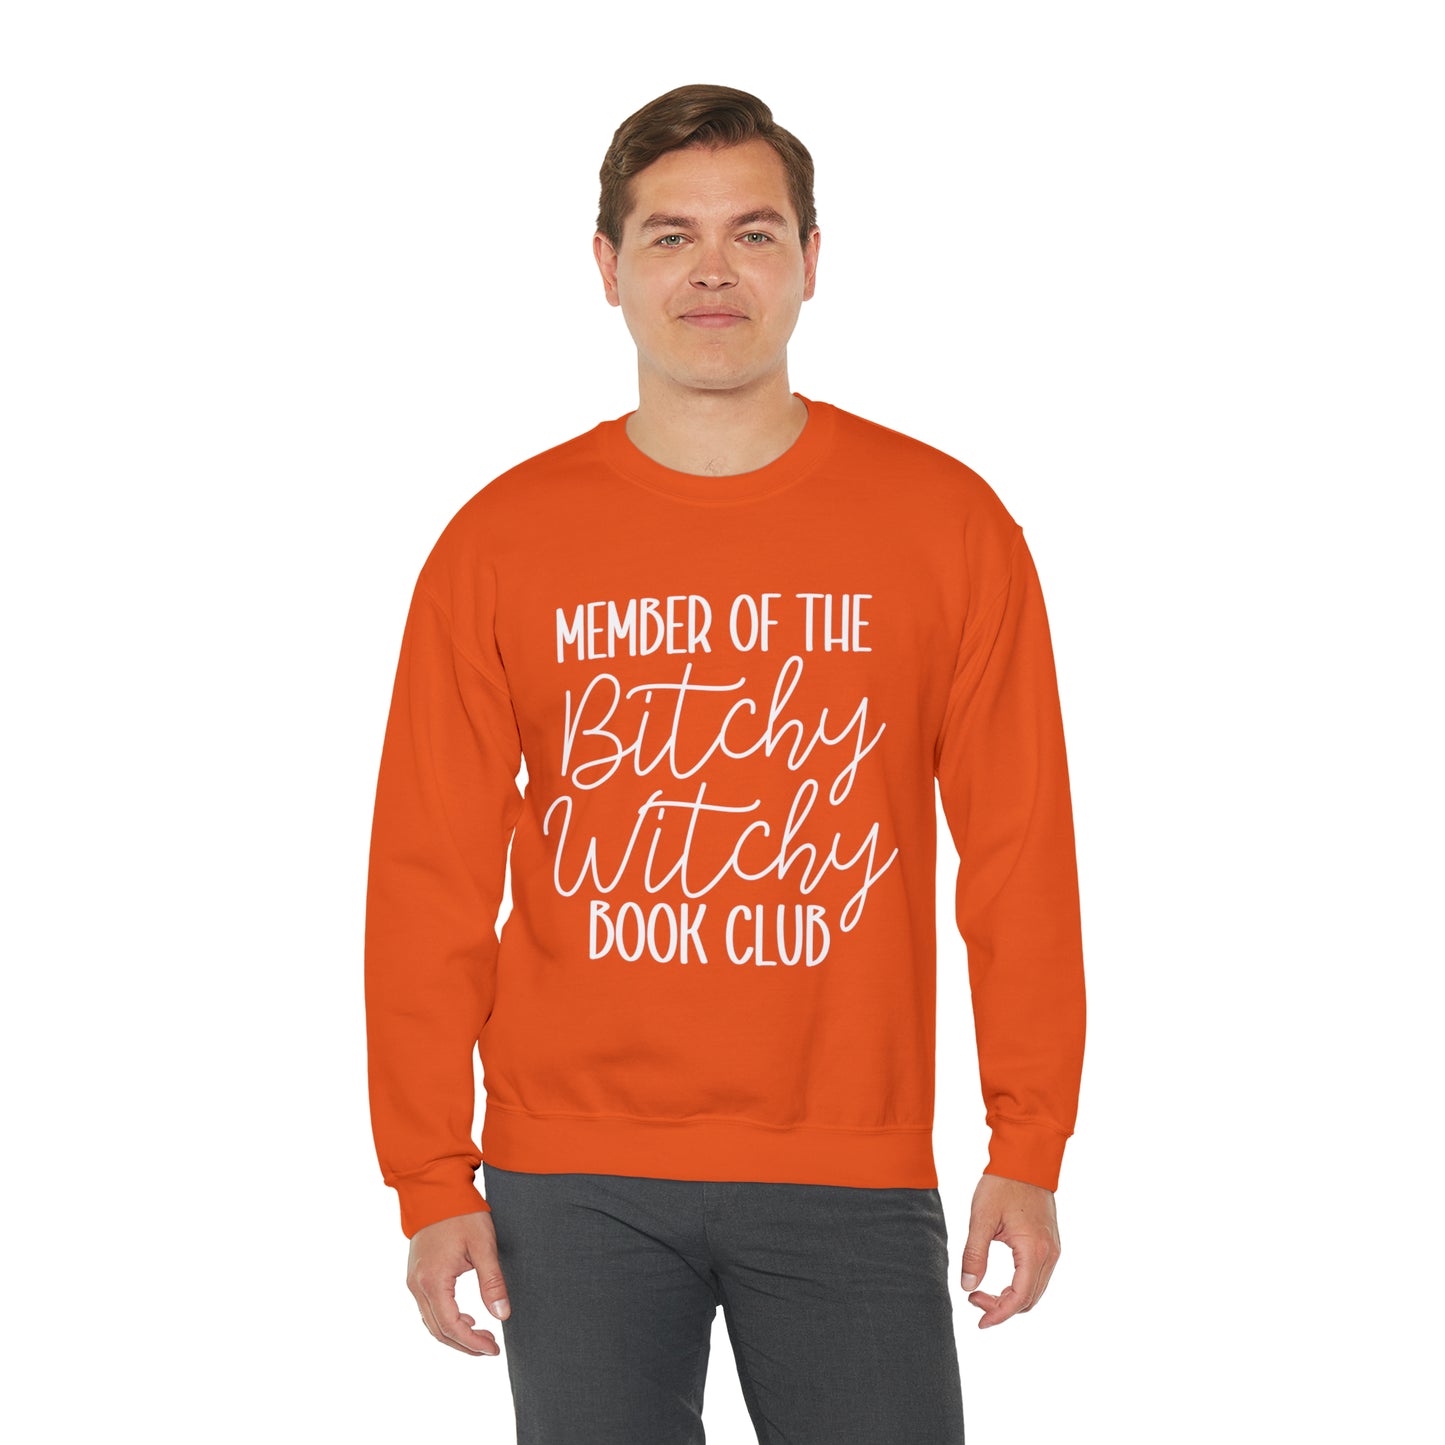 Member of the Bitchy Witchy Book Club Crewneck Sweatshirt